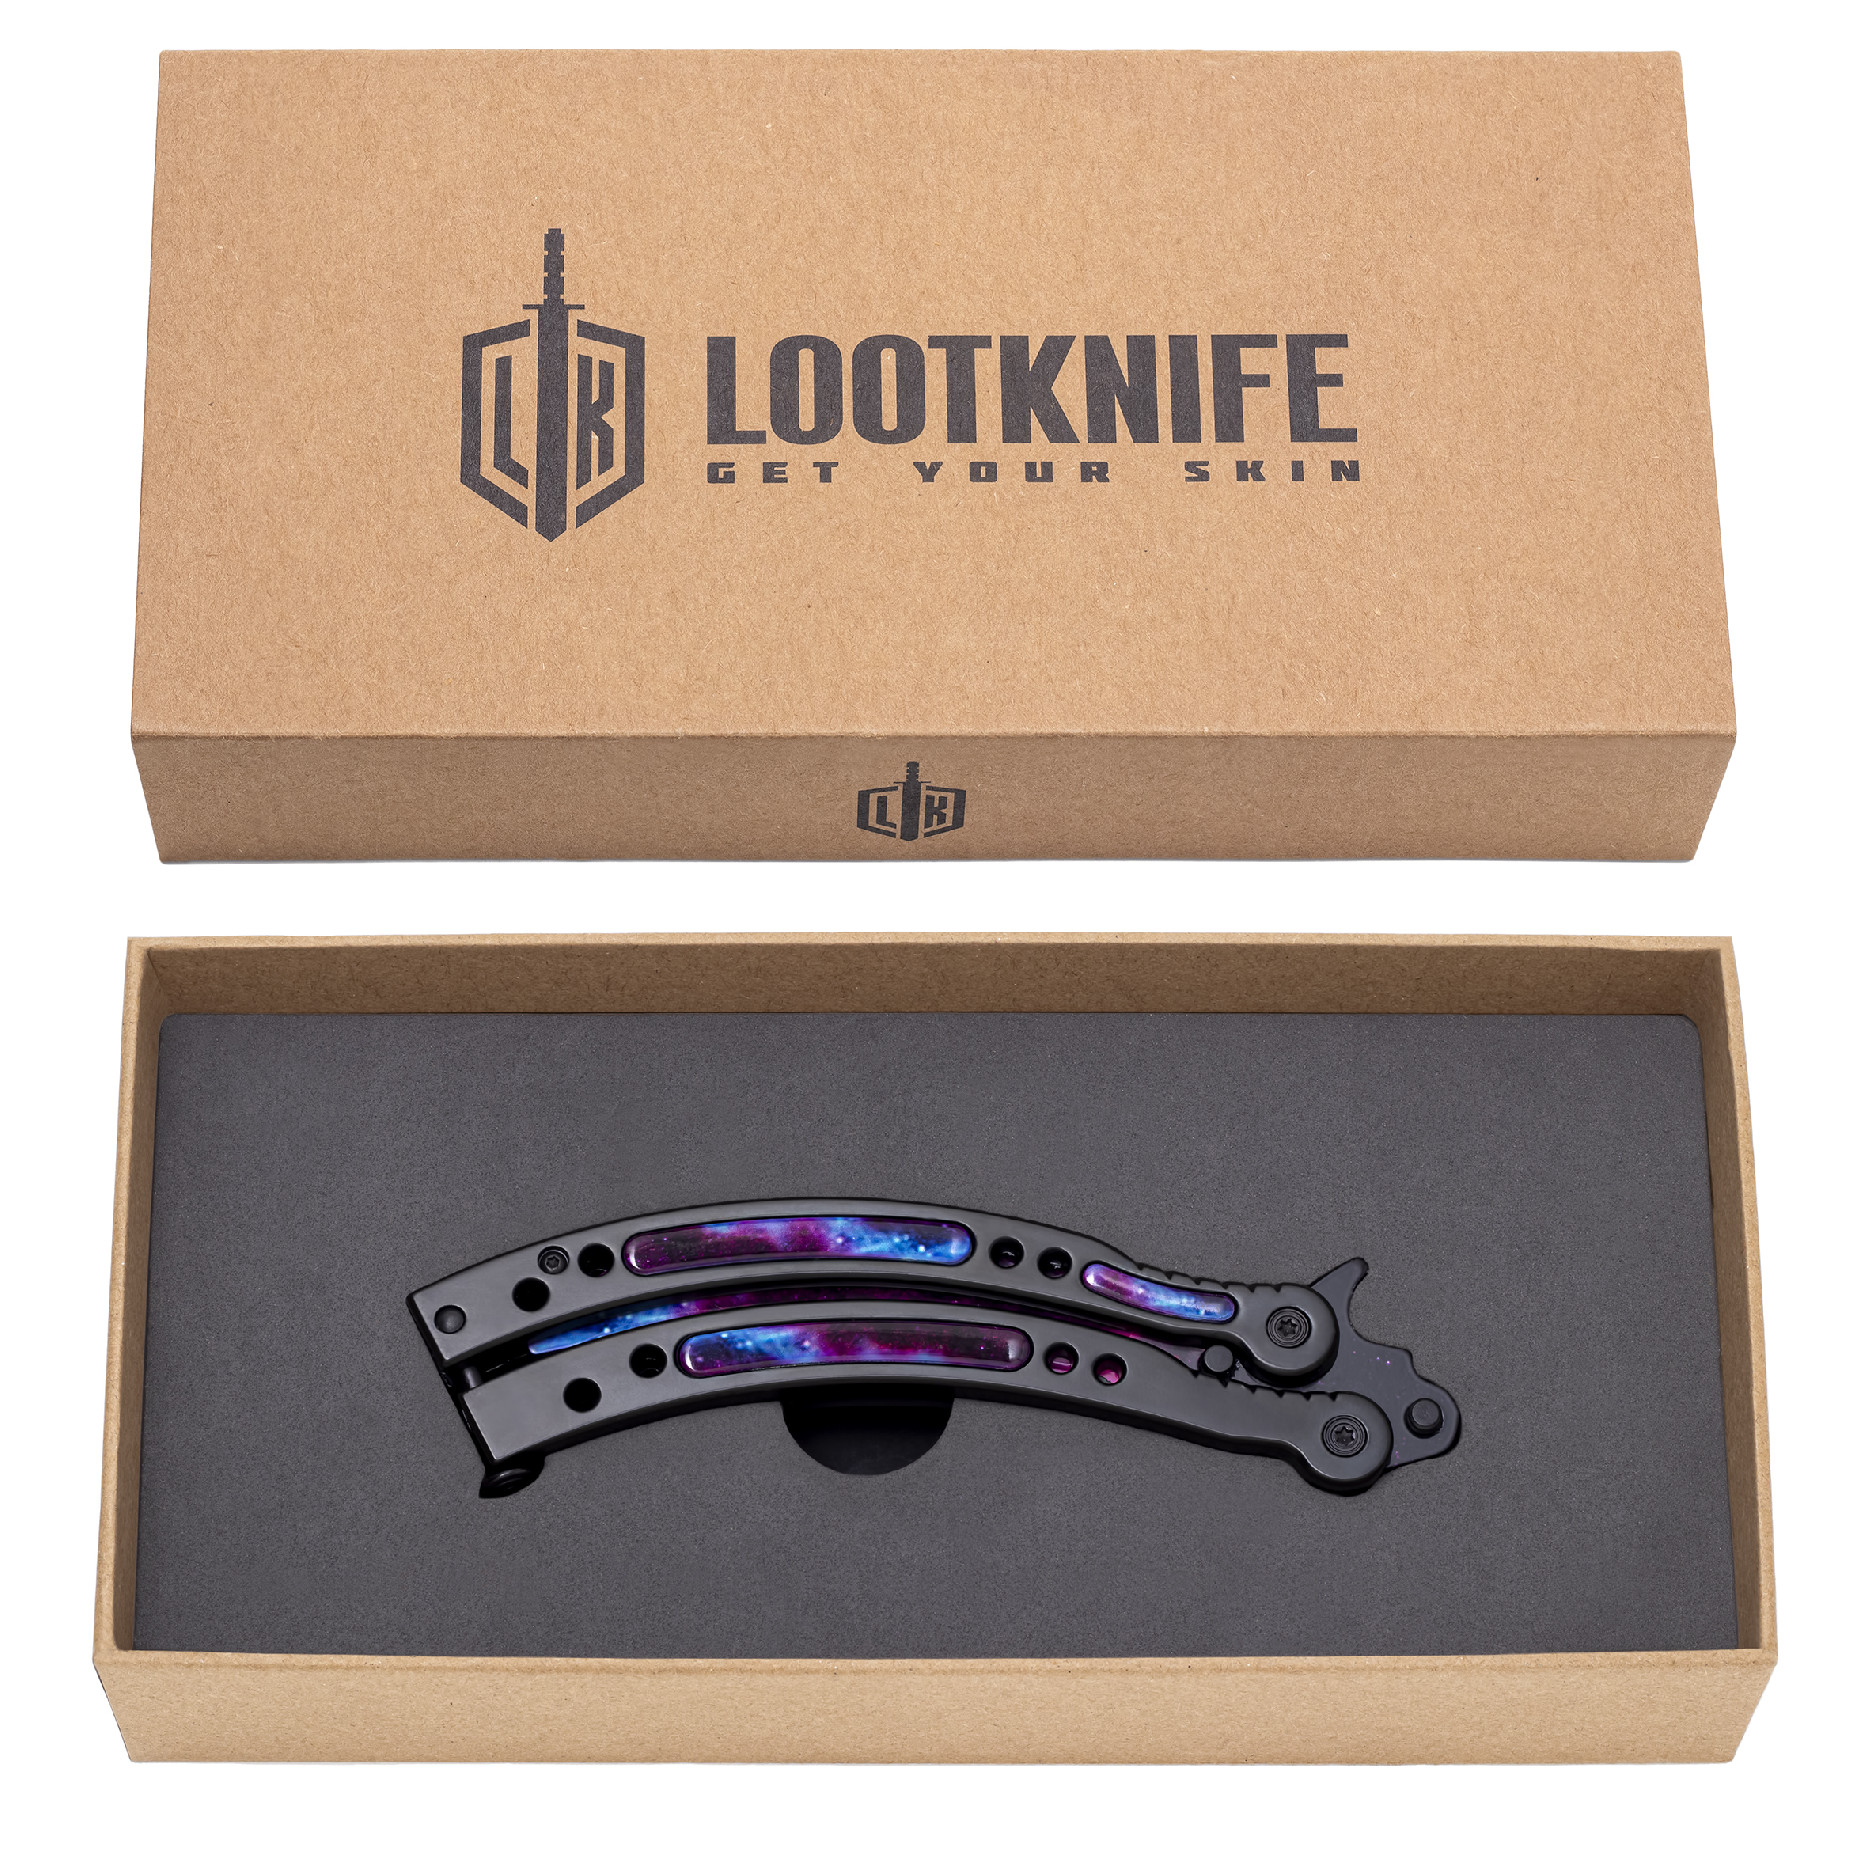 Galaxy Battle Box - Sword, knives, butterfly knife, throwing knives